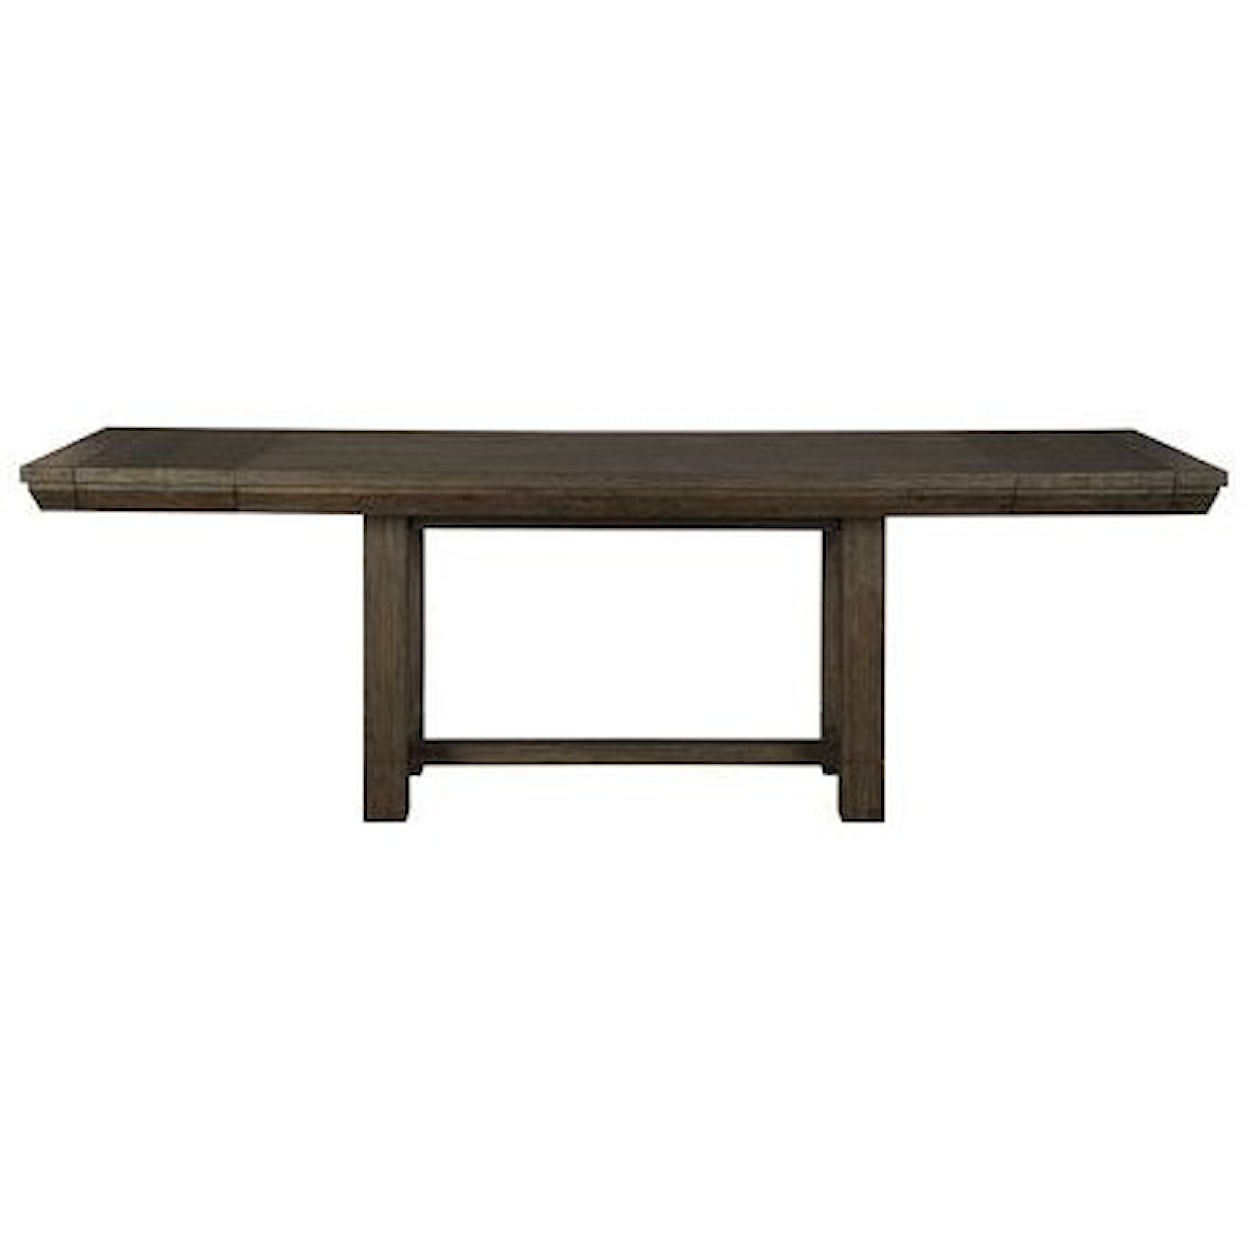 Signature Design by Ashley Dellbeck Dining Table